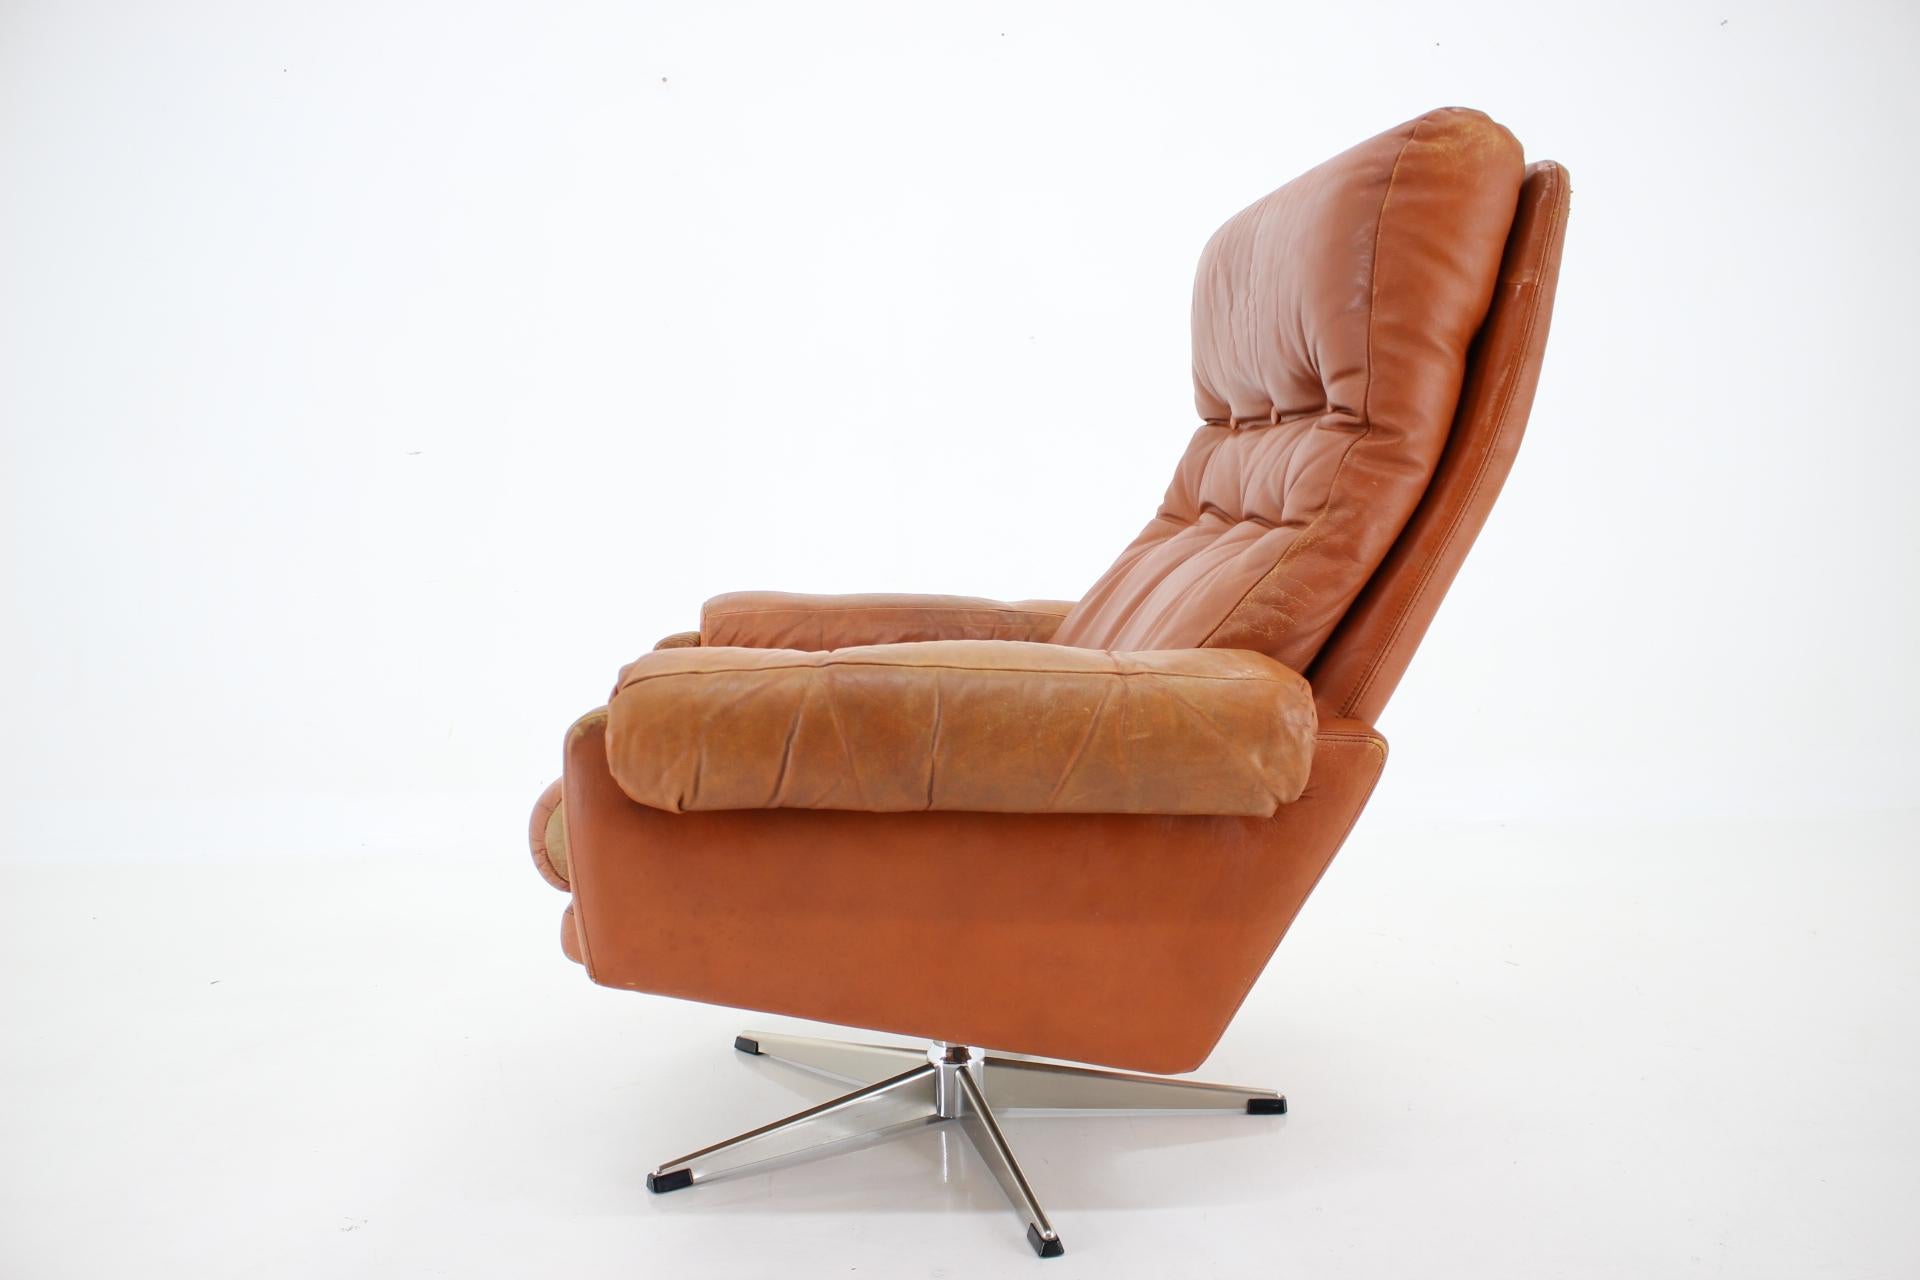 1970s Leather Swivel Armchair by Nili Stoppmobler, Denmark For Sale 2